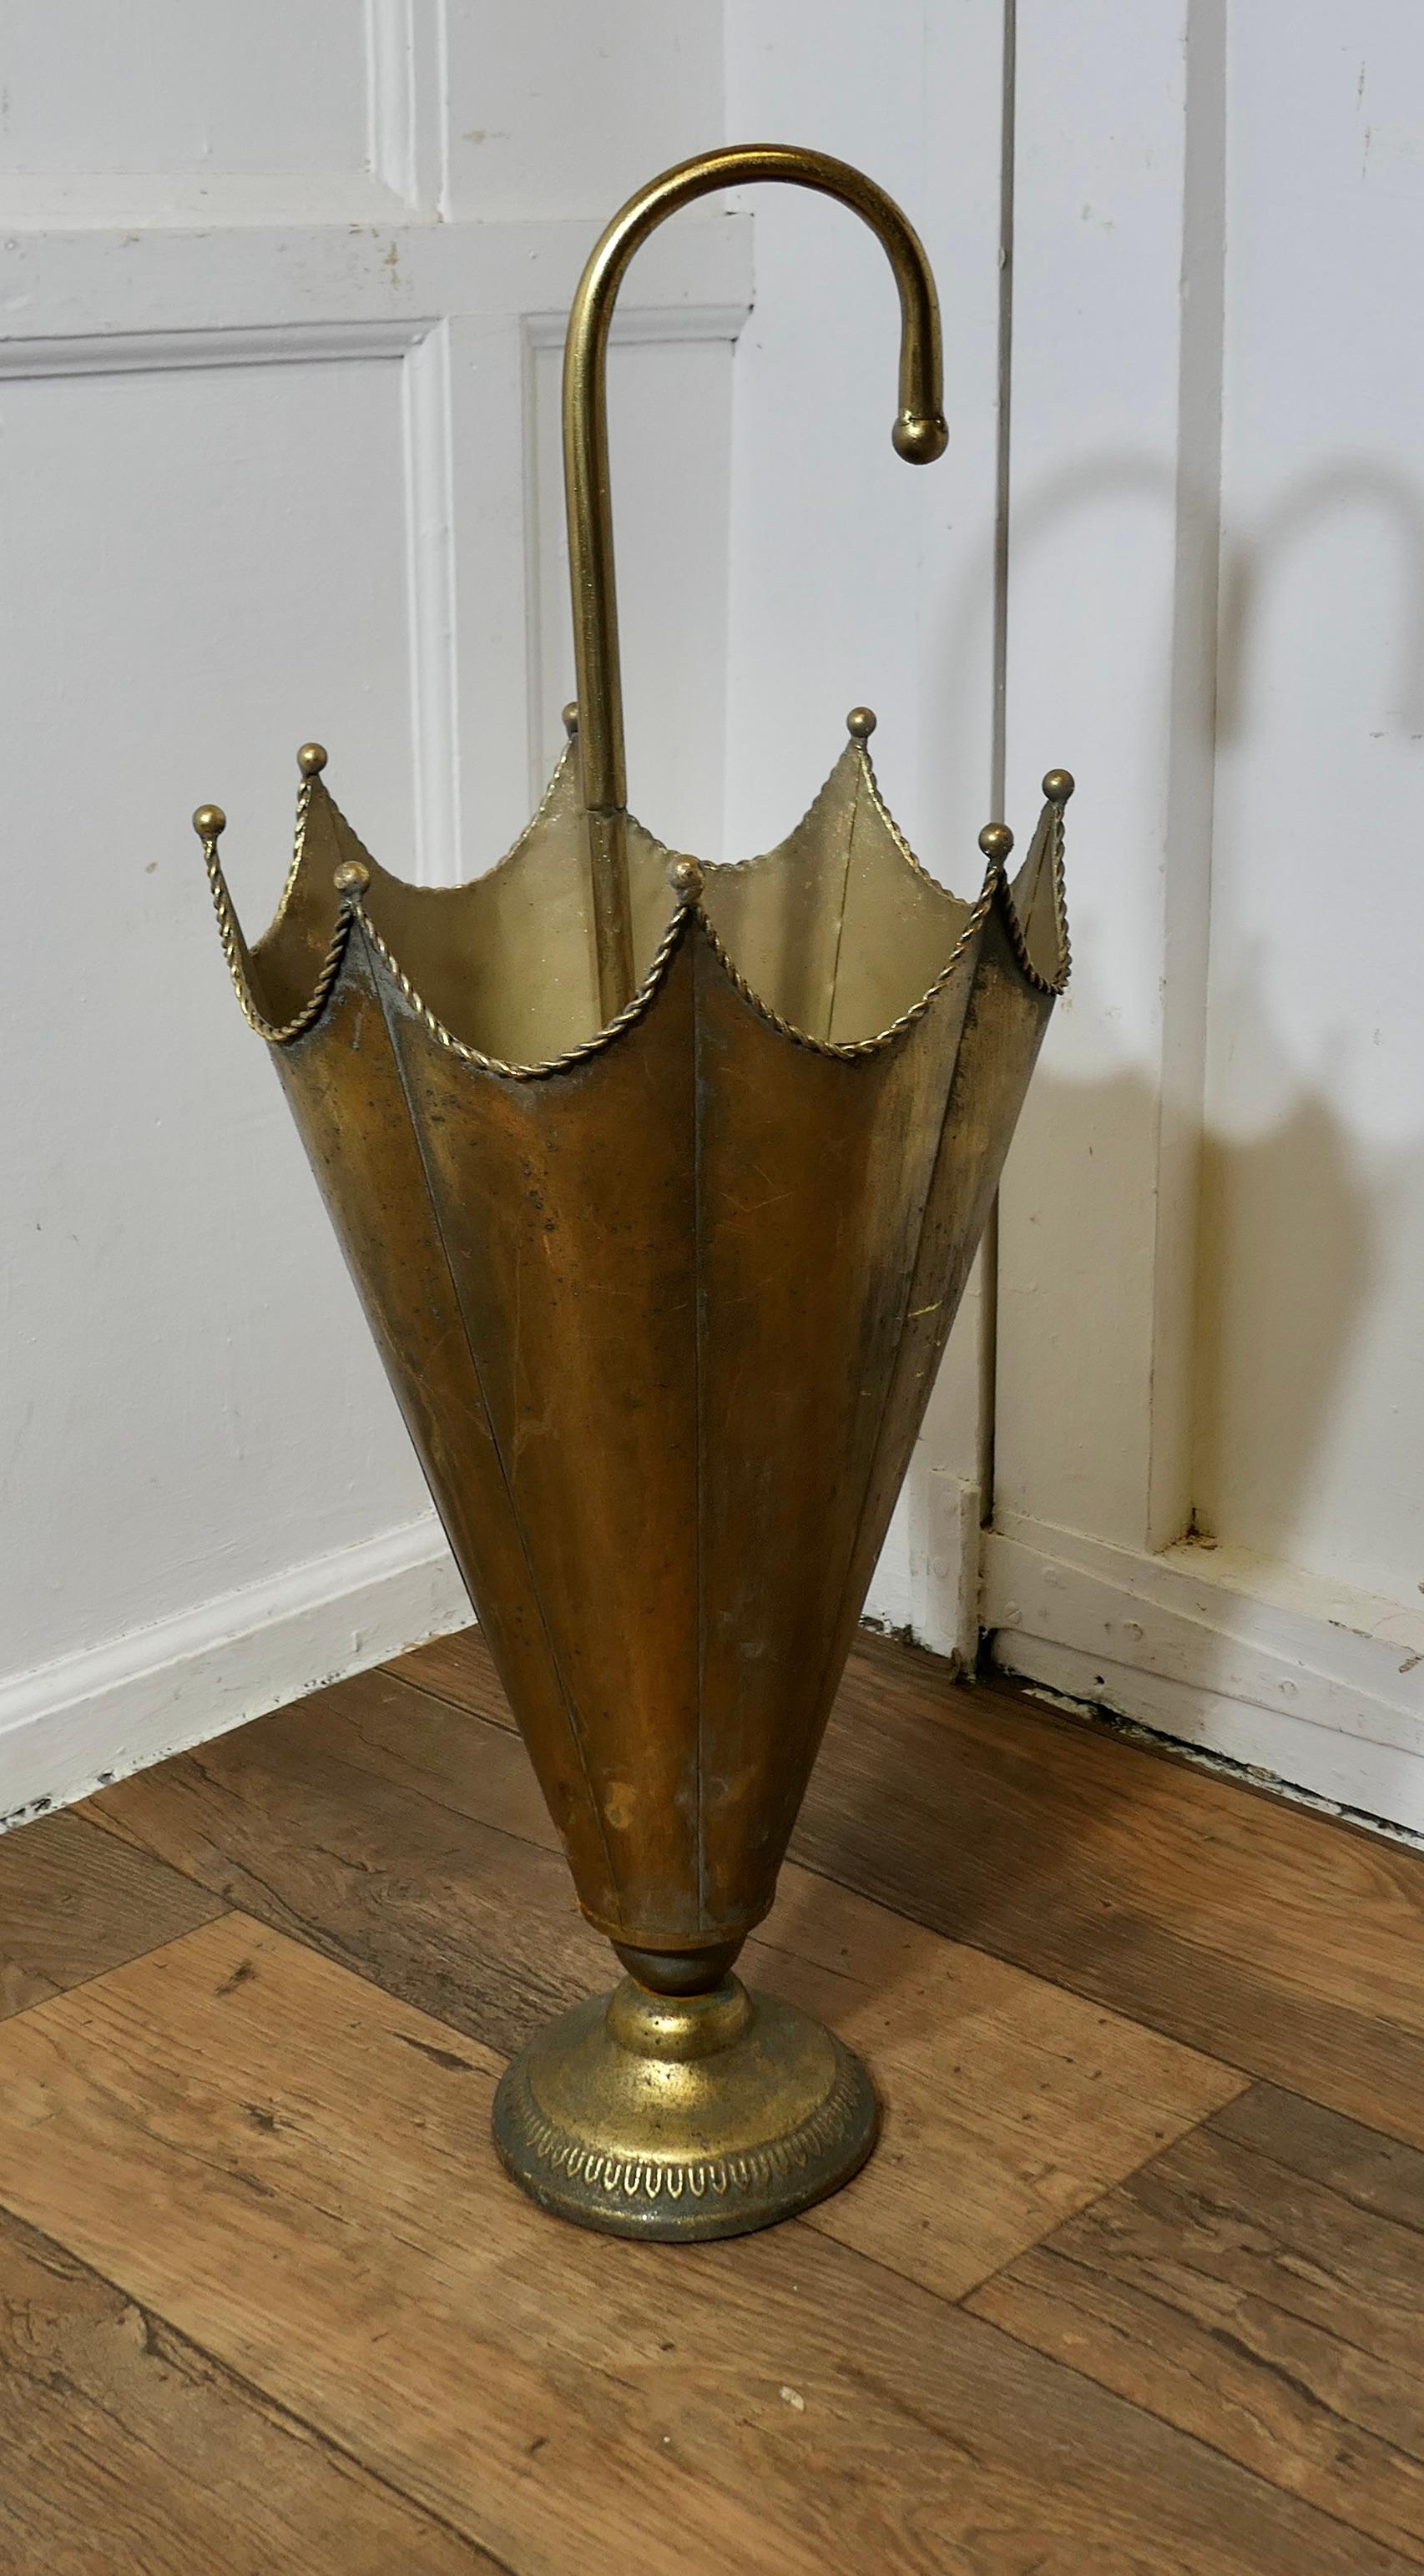 Umbrella Shaped Brass Umbrella Stand

An unusual and attractive piece, made in brass in the shape of an open umbrella
The stand has an elegant hooped handle  
The stand is 31” tall and 12” in diameter 
TFB197